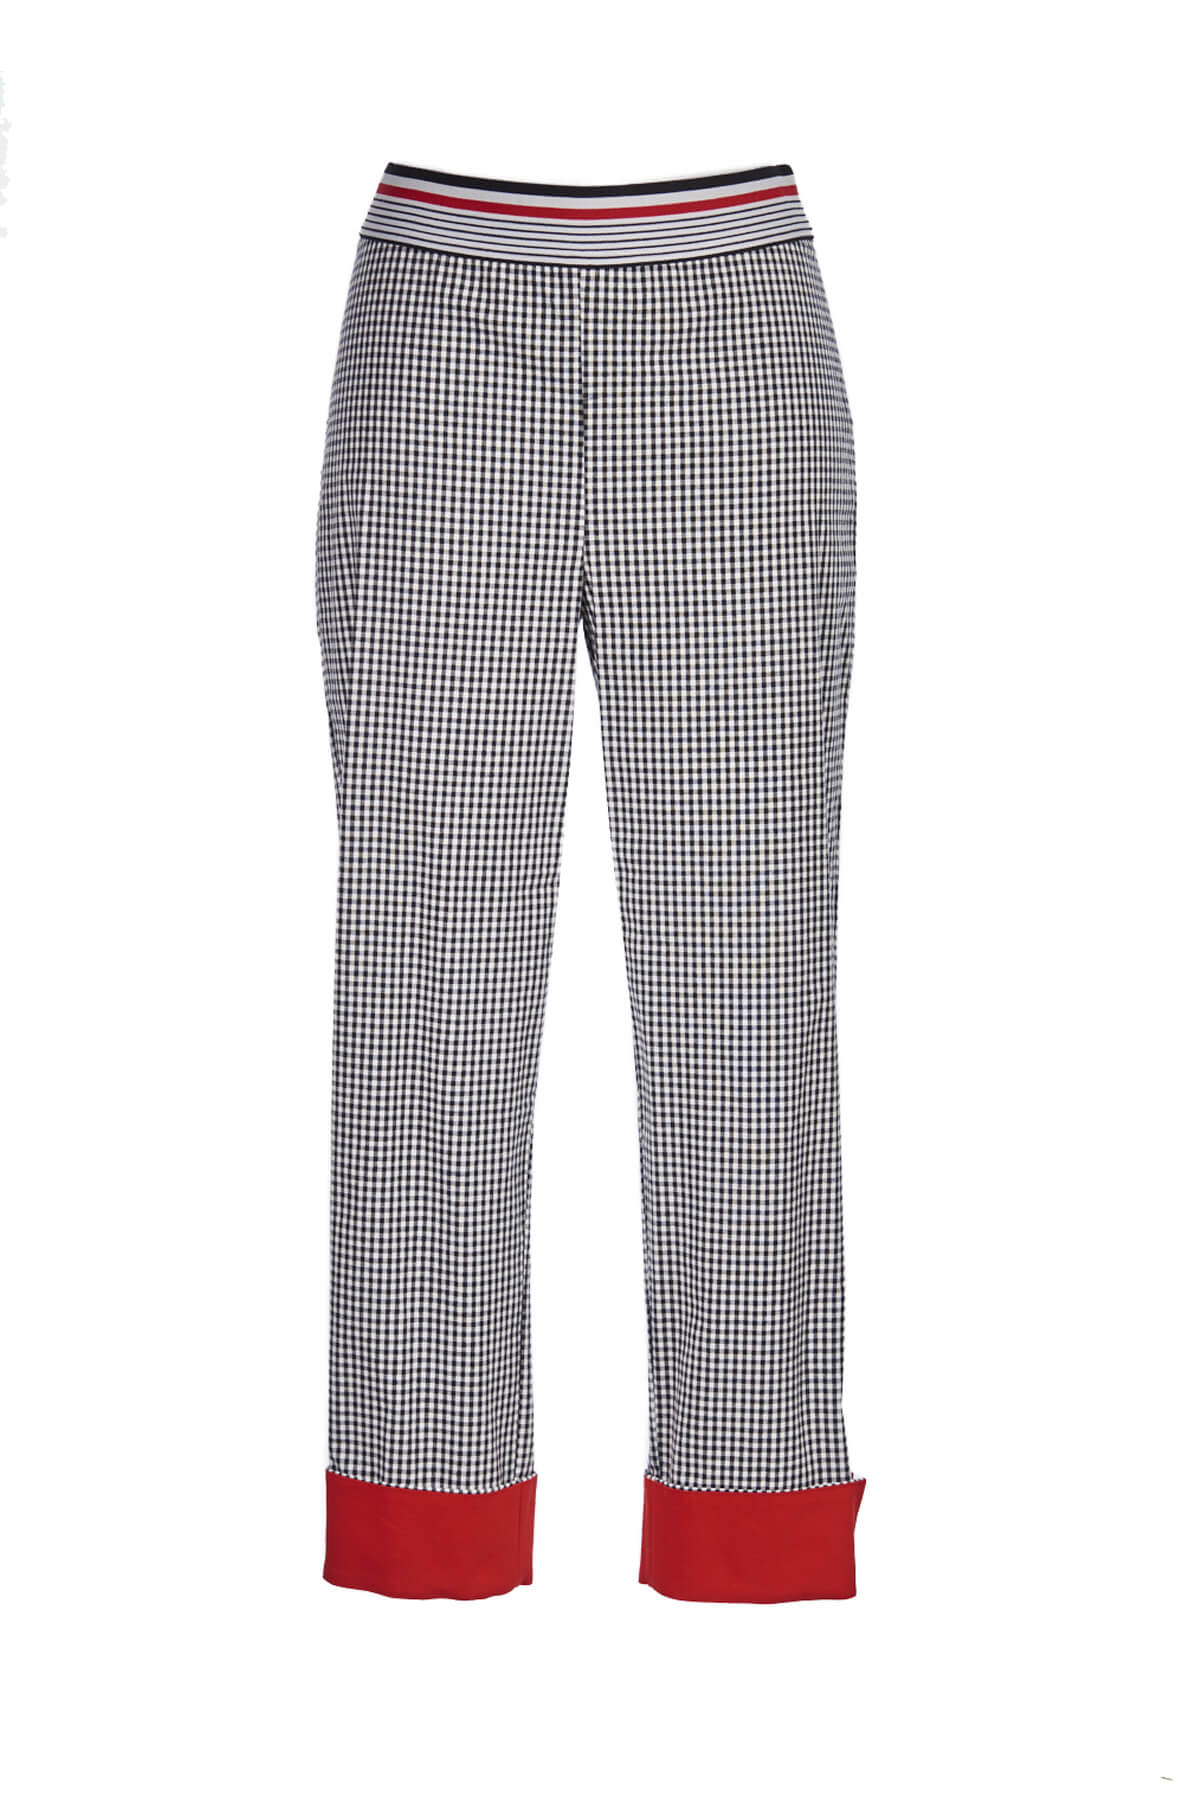 Cigarette pants in black and white check cotton fabric - Save The Queen!